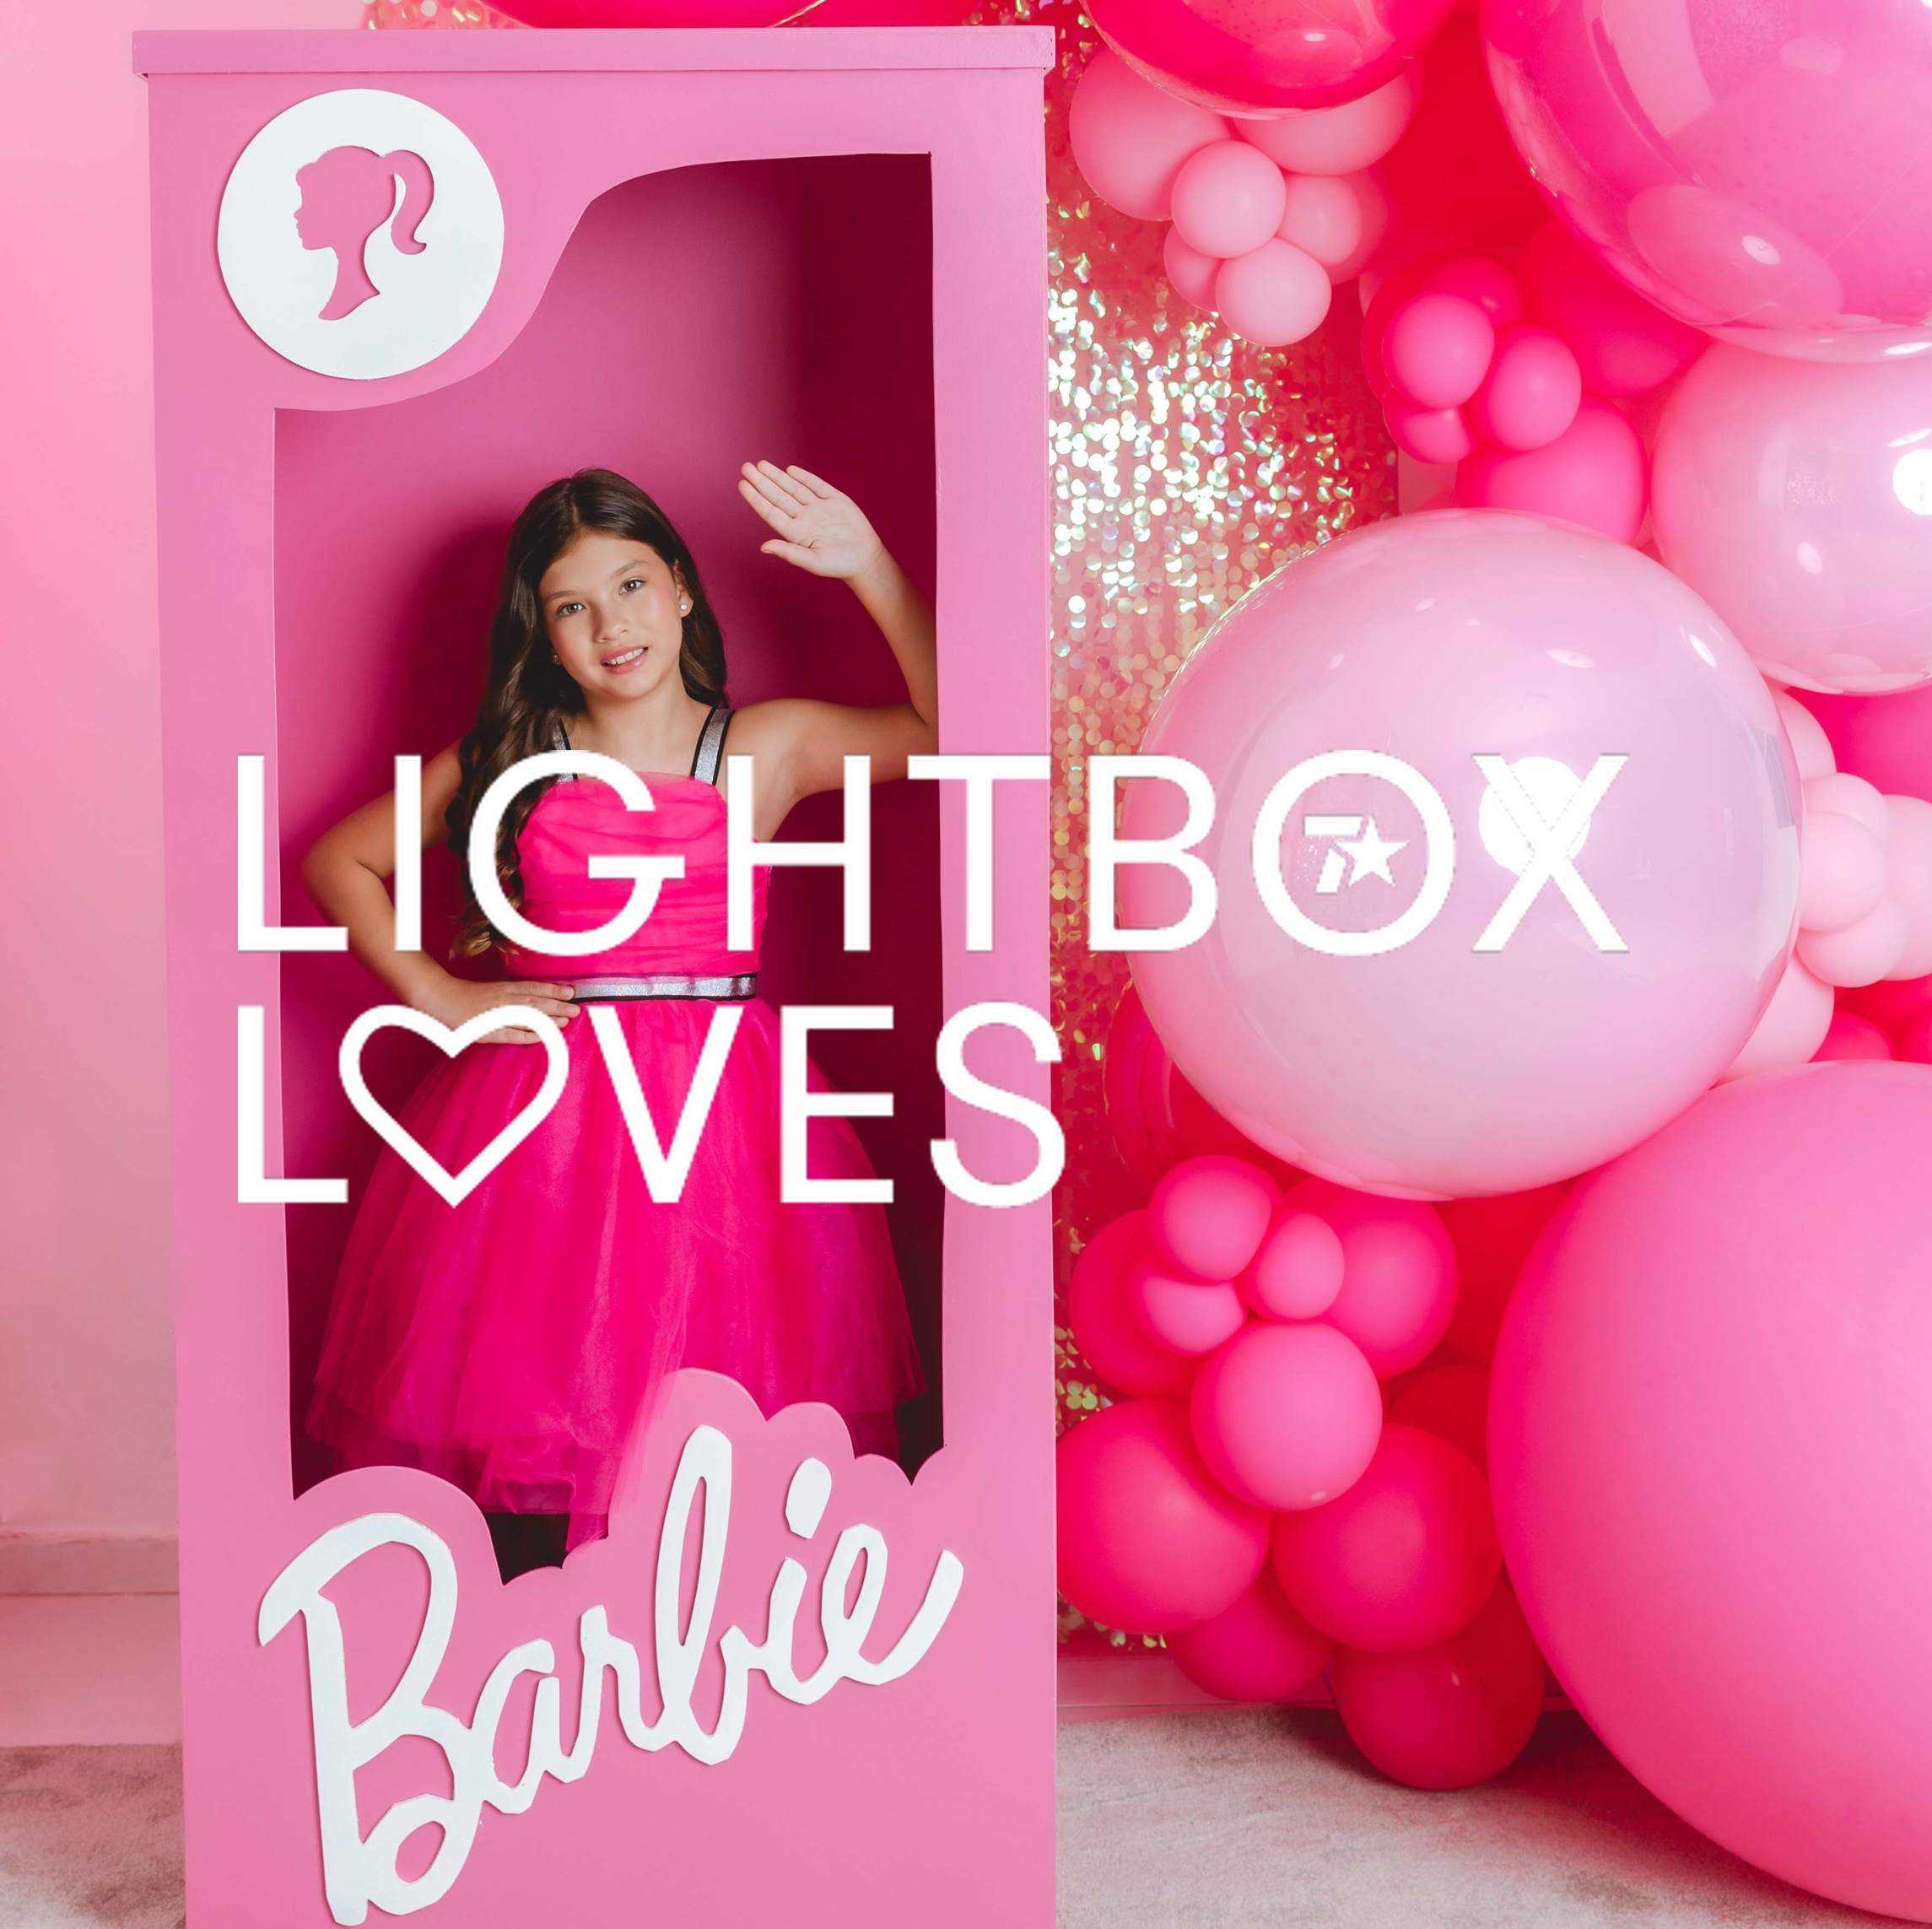 Image of a women dressed as Barbie in a life-sized Barbie box with pink ballons in the background.